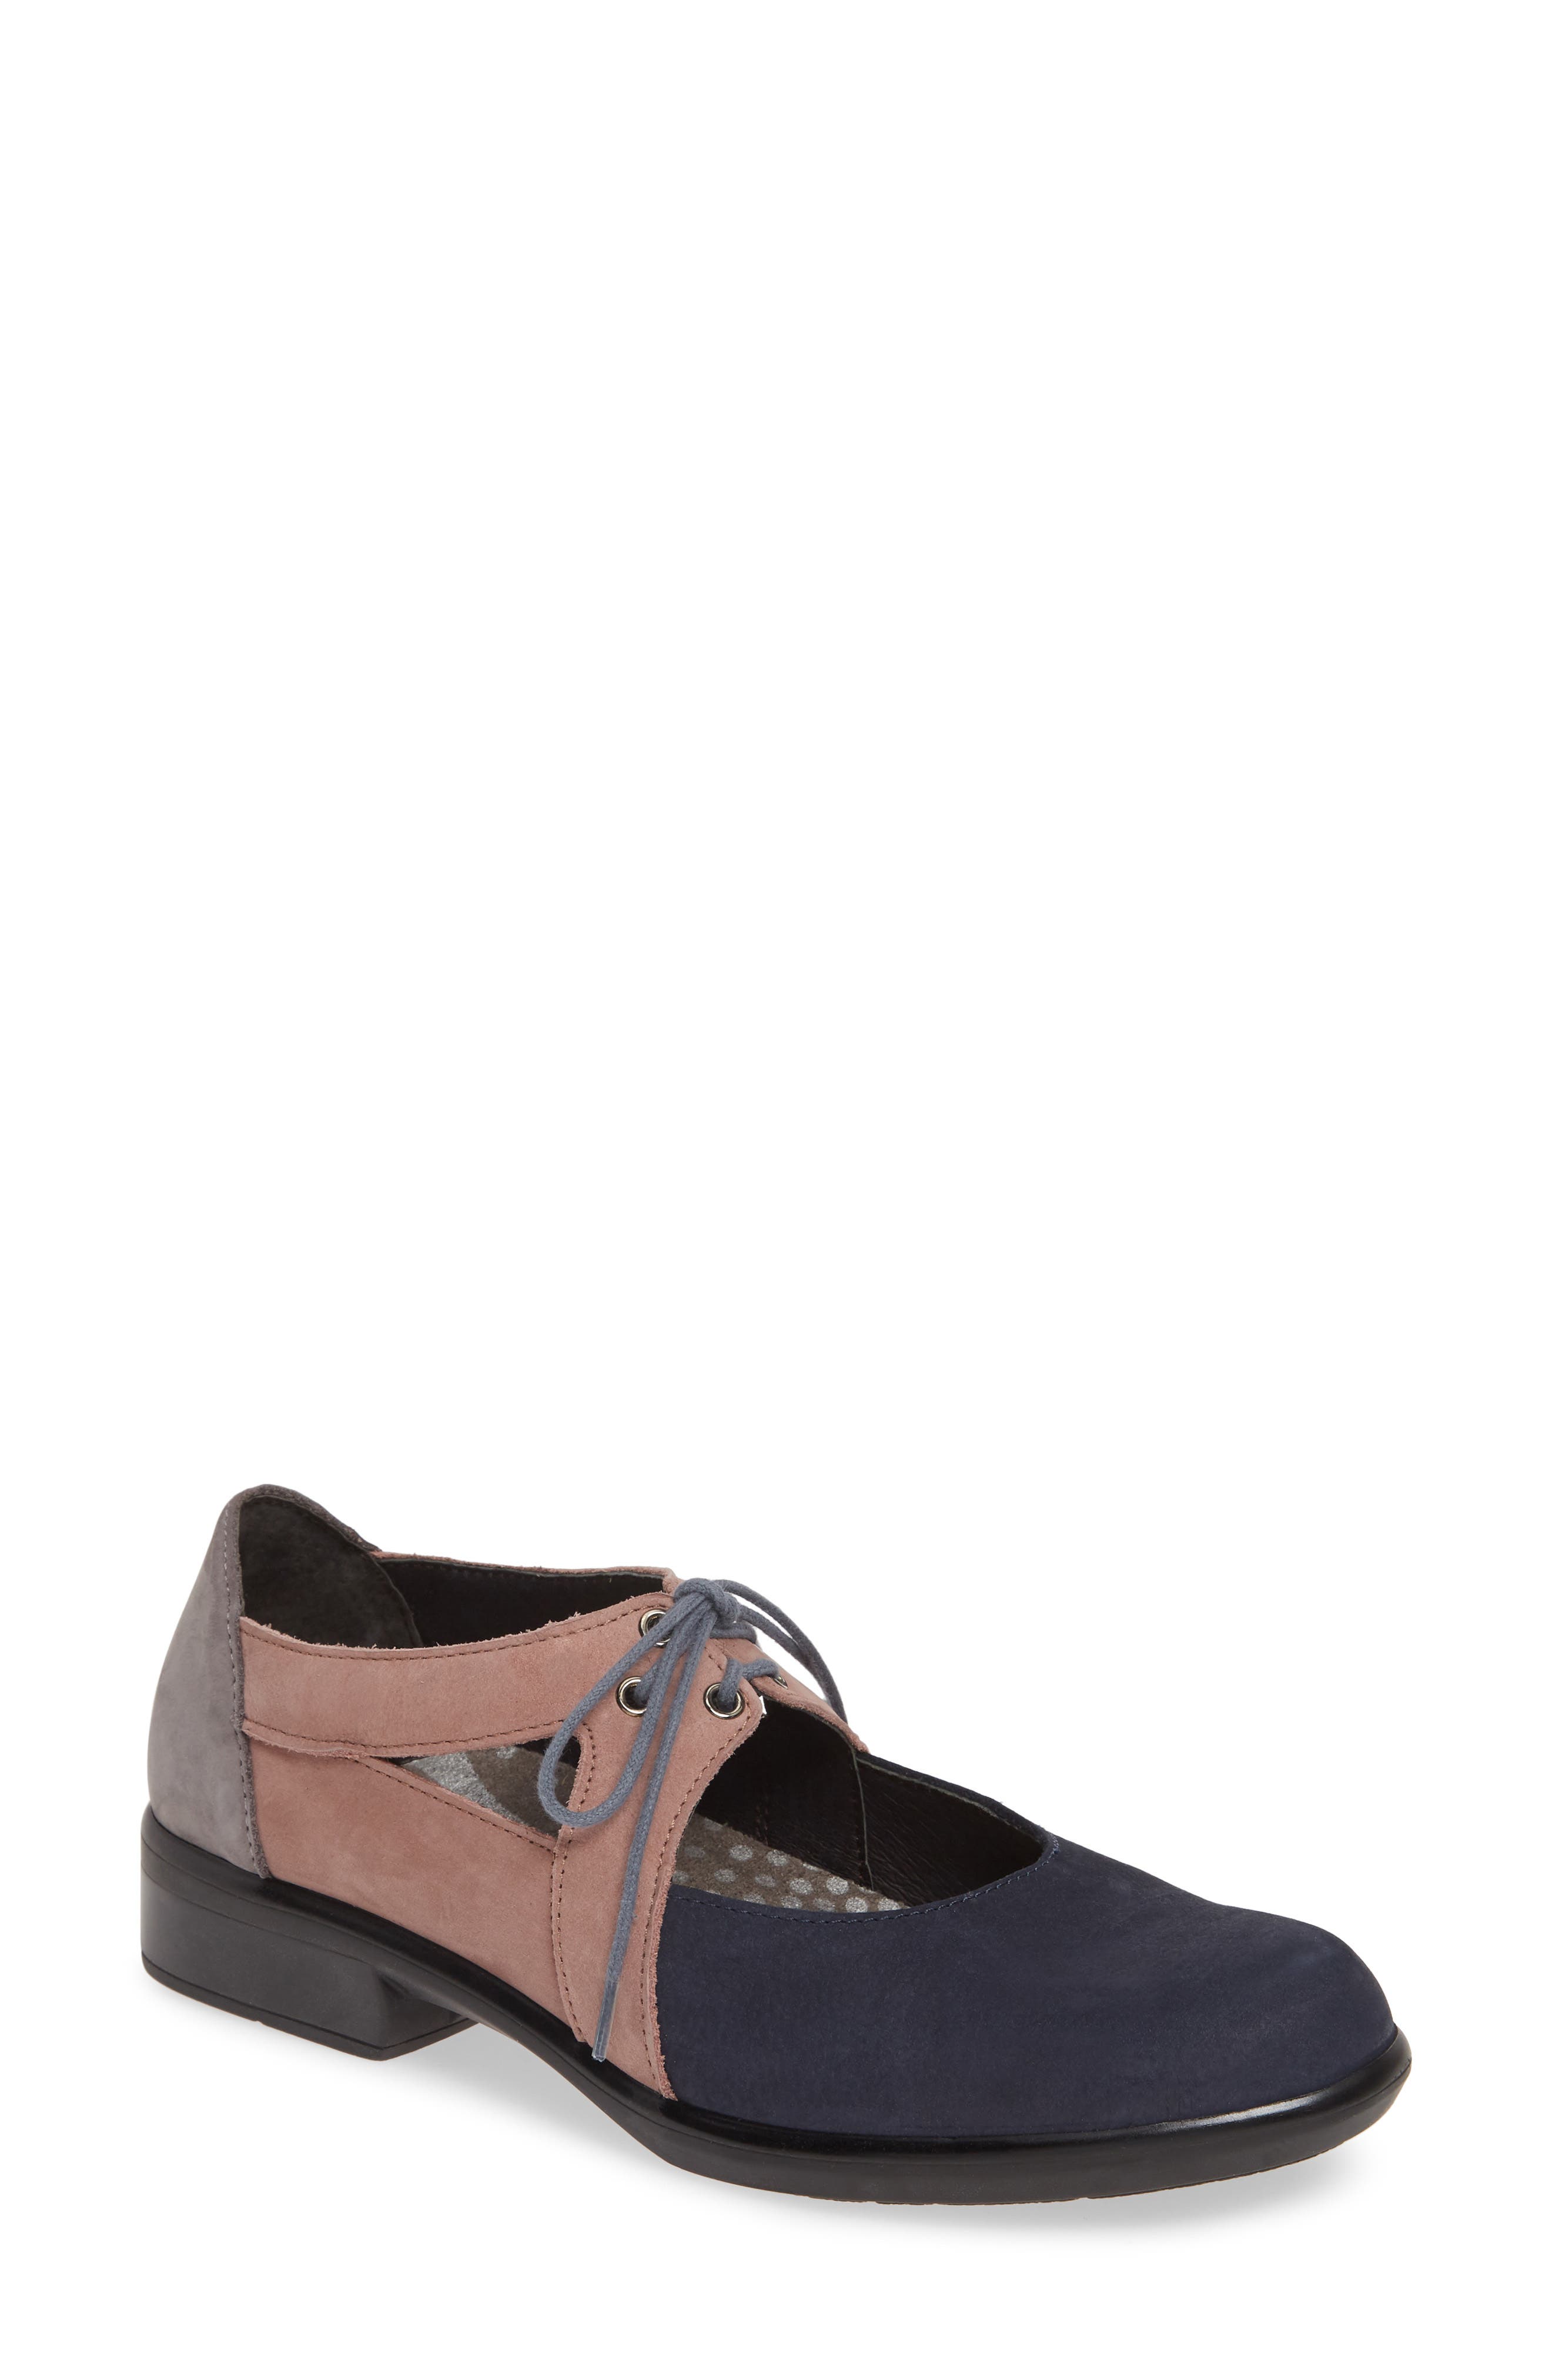 nordstrom naot shoes